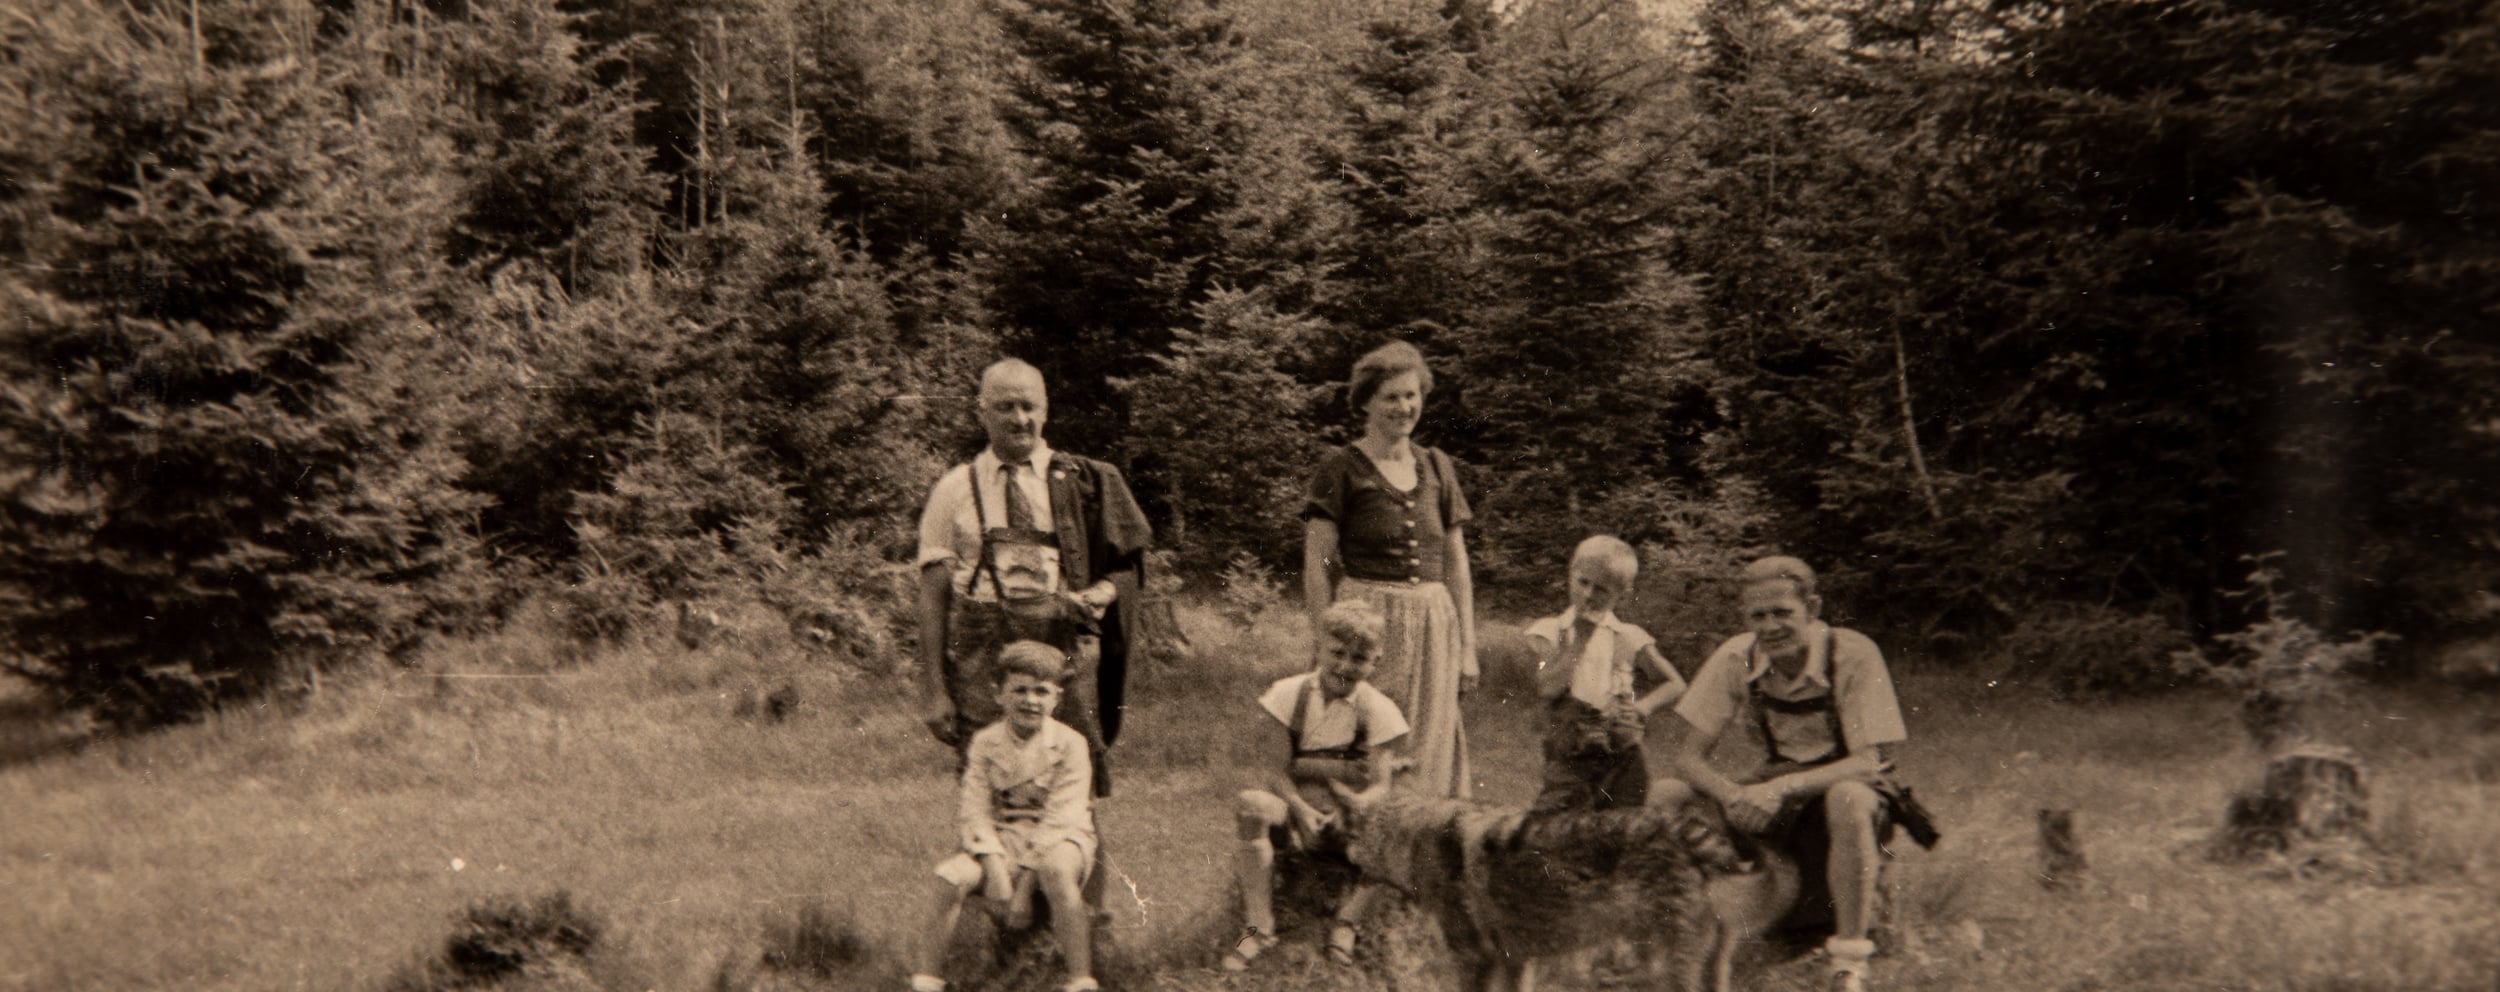 An old photograph of the Dilly family in a clearing in the forest